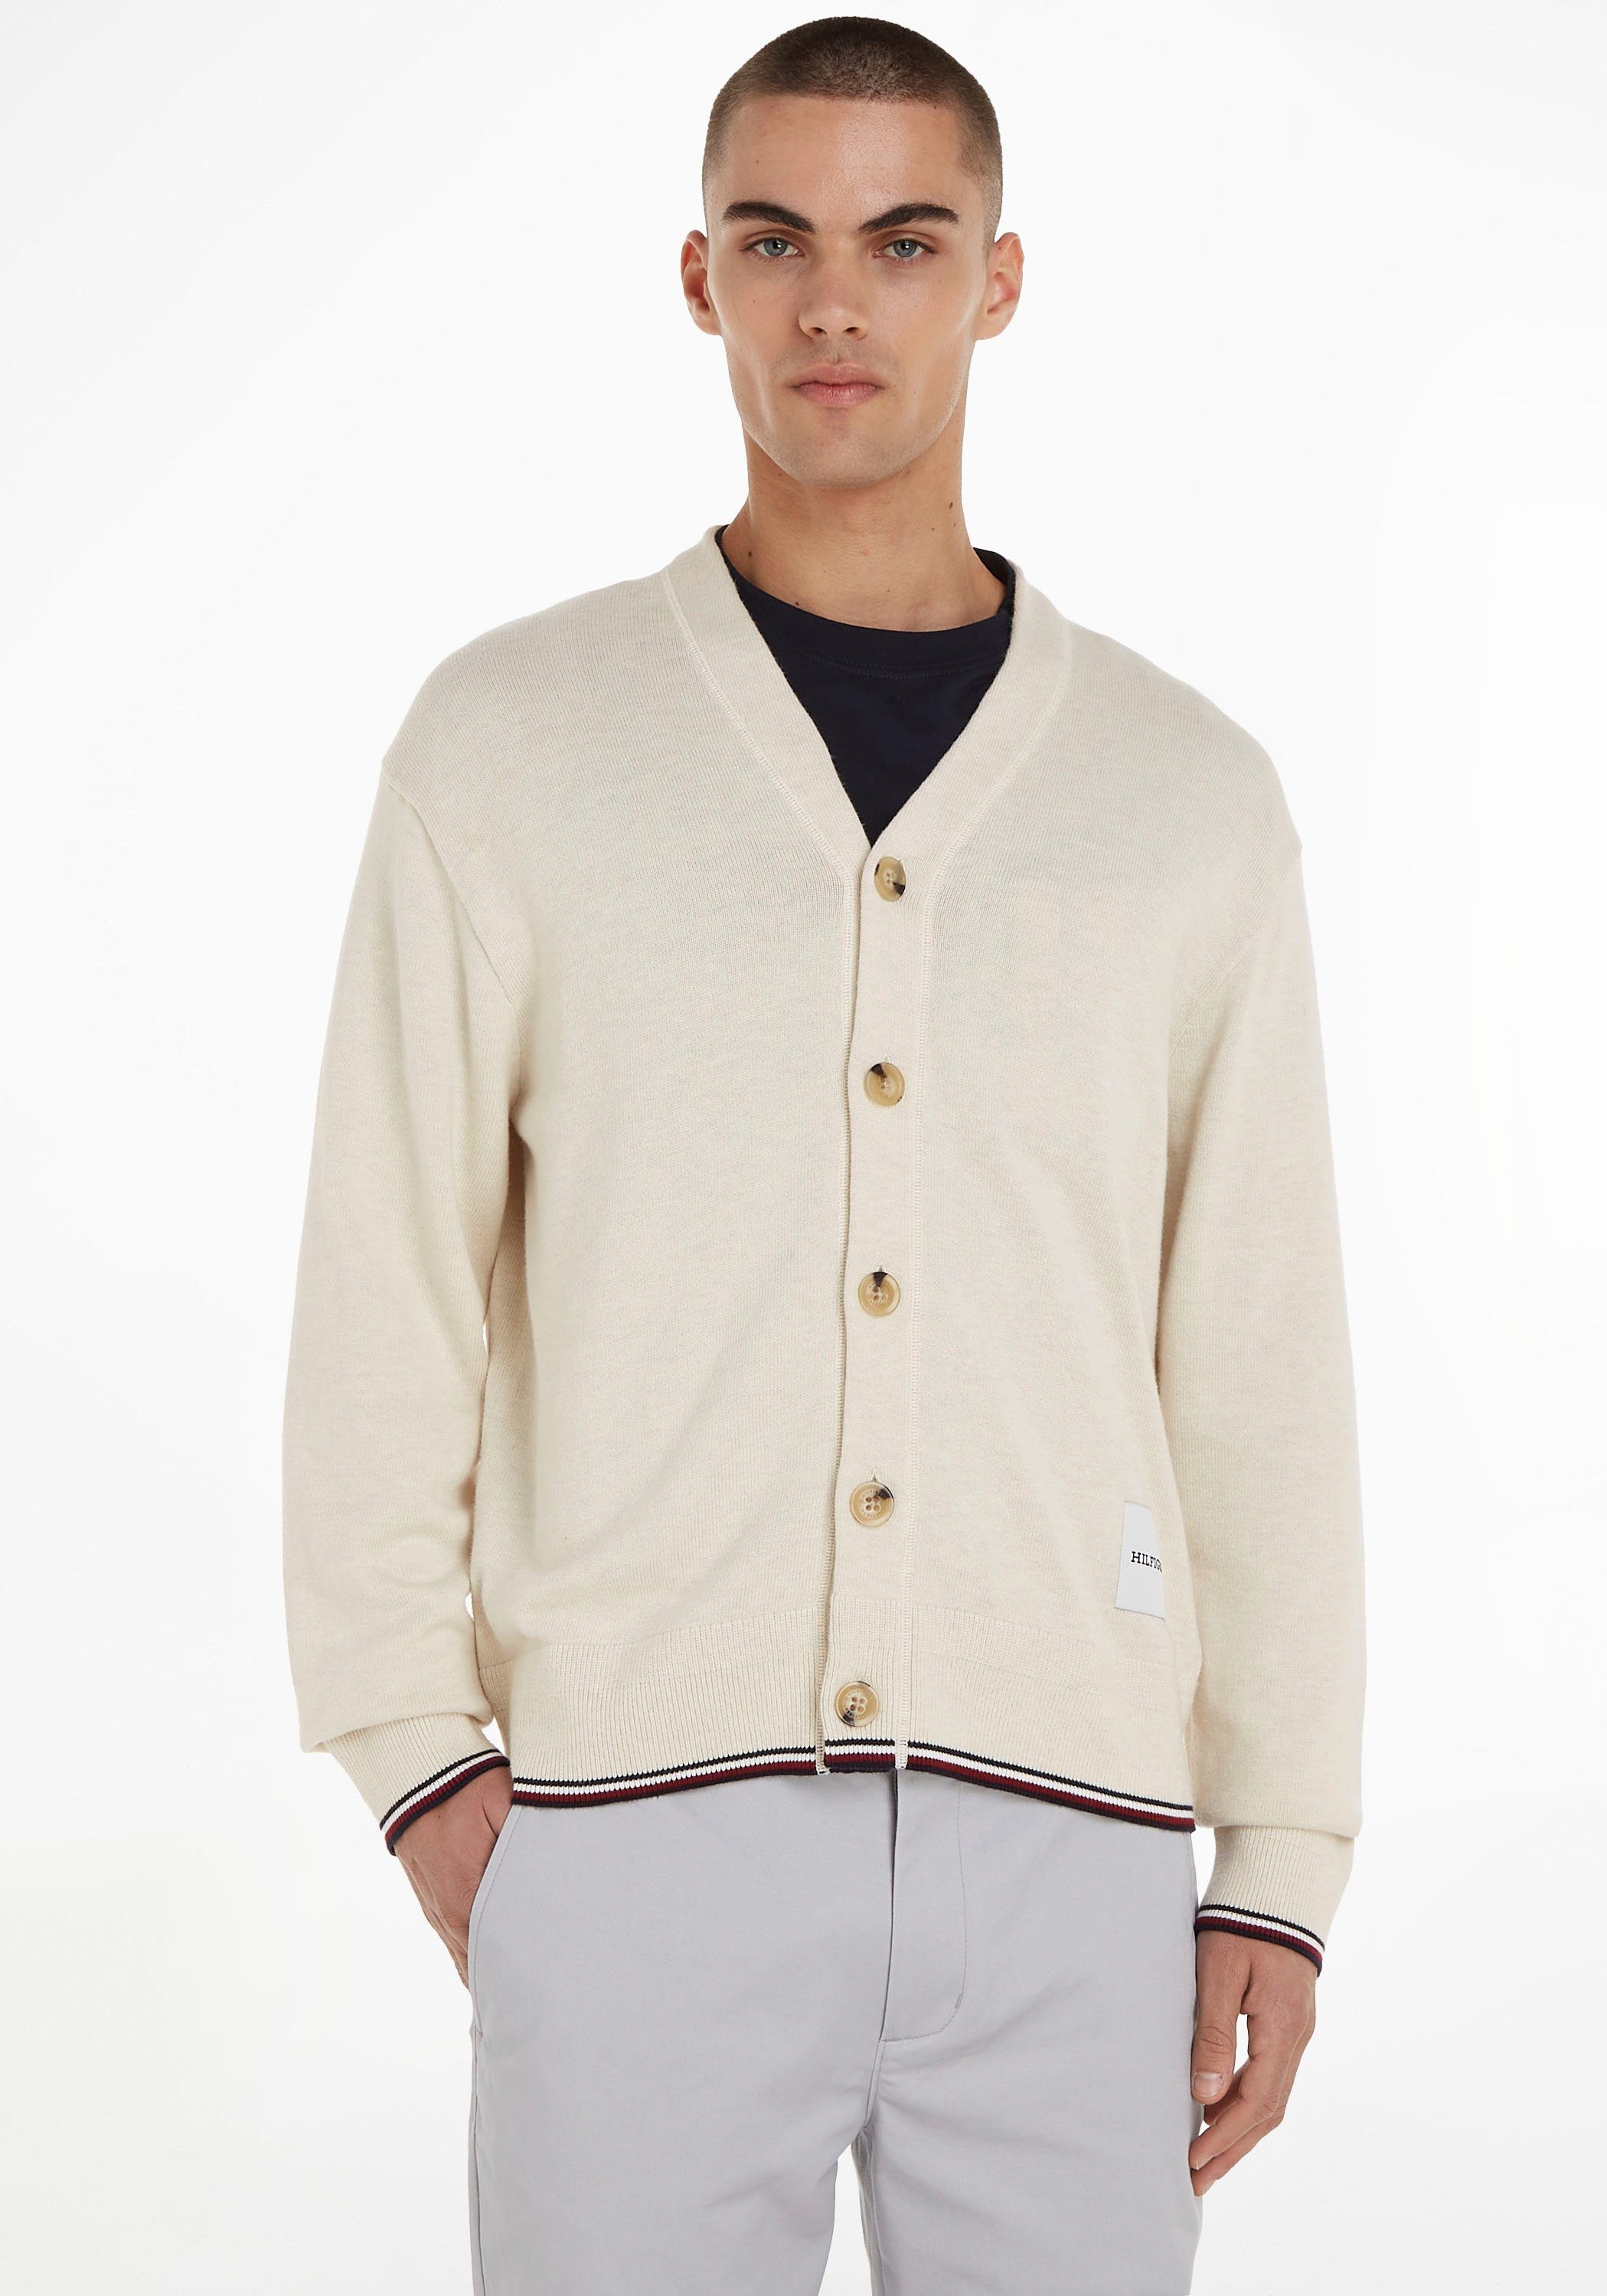 GS CARDIGAN Sweatshirt TIPPED MONOTYPE White Heather Tommy Weathered Hilfiger